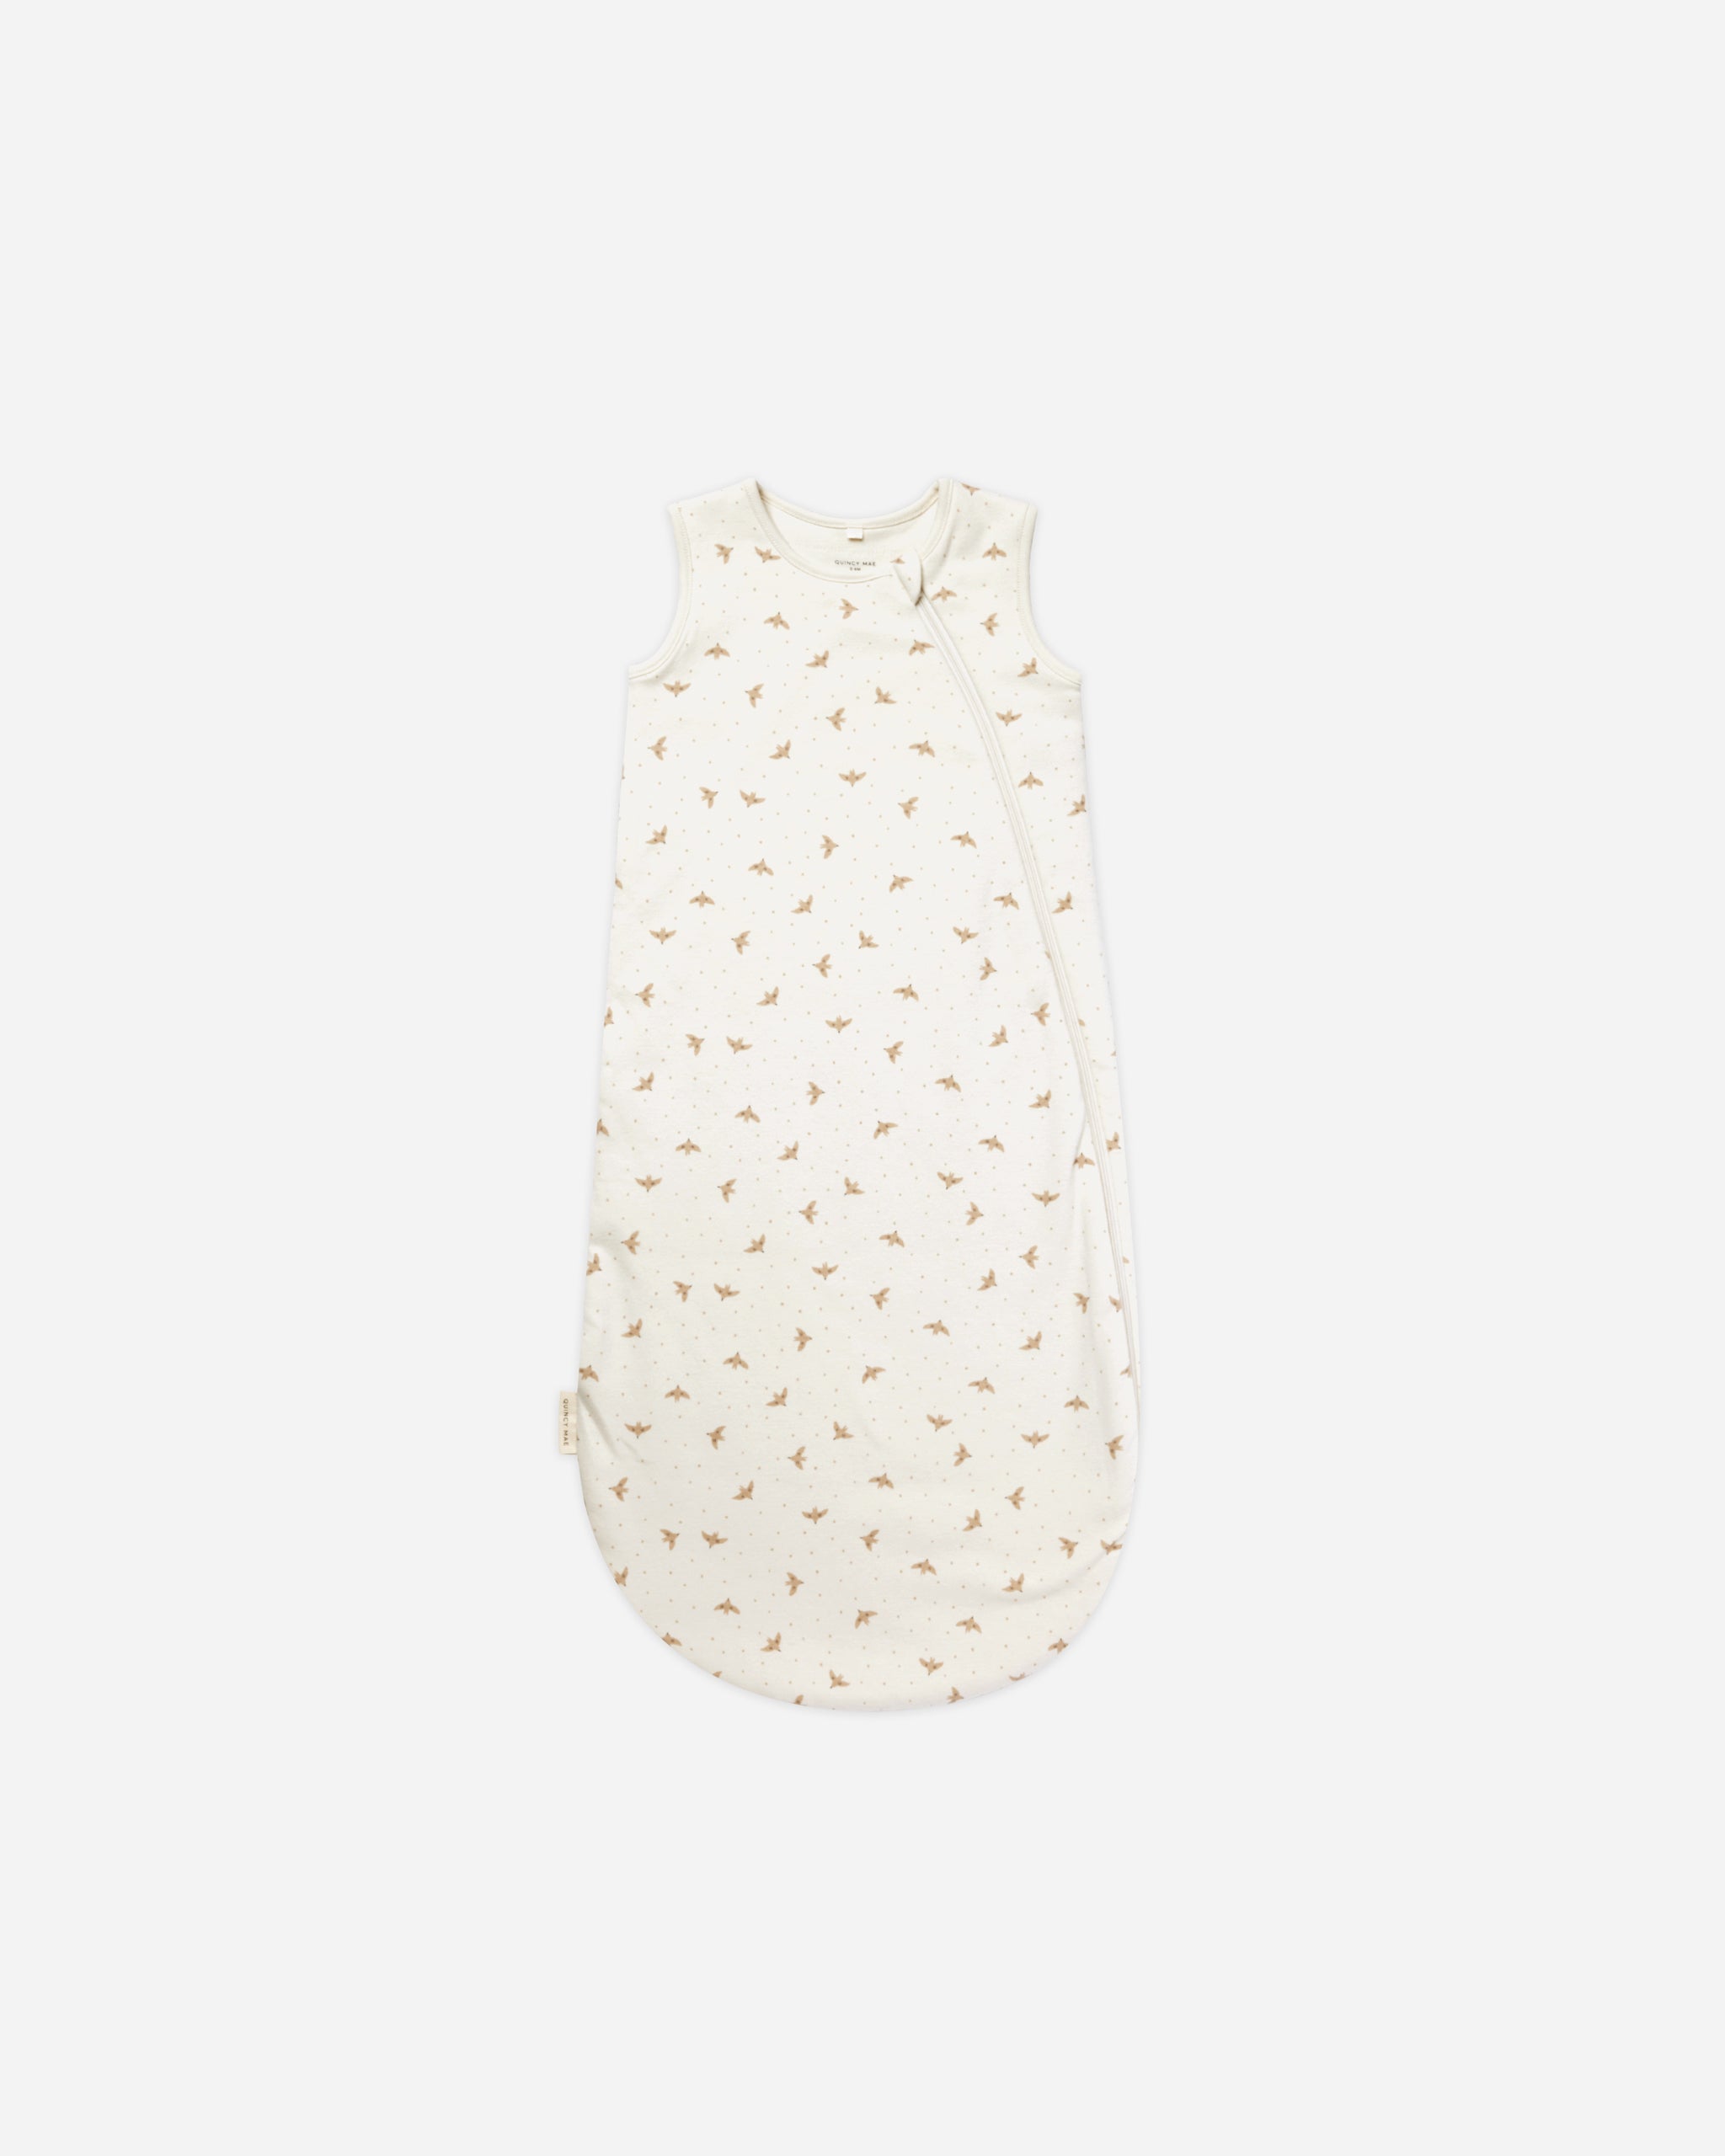 Jersey Sleeping Bag || Doves - Rylee + Cru | Kids Clothes | Trendy Baby Clothes | Modern Infant Outfits |